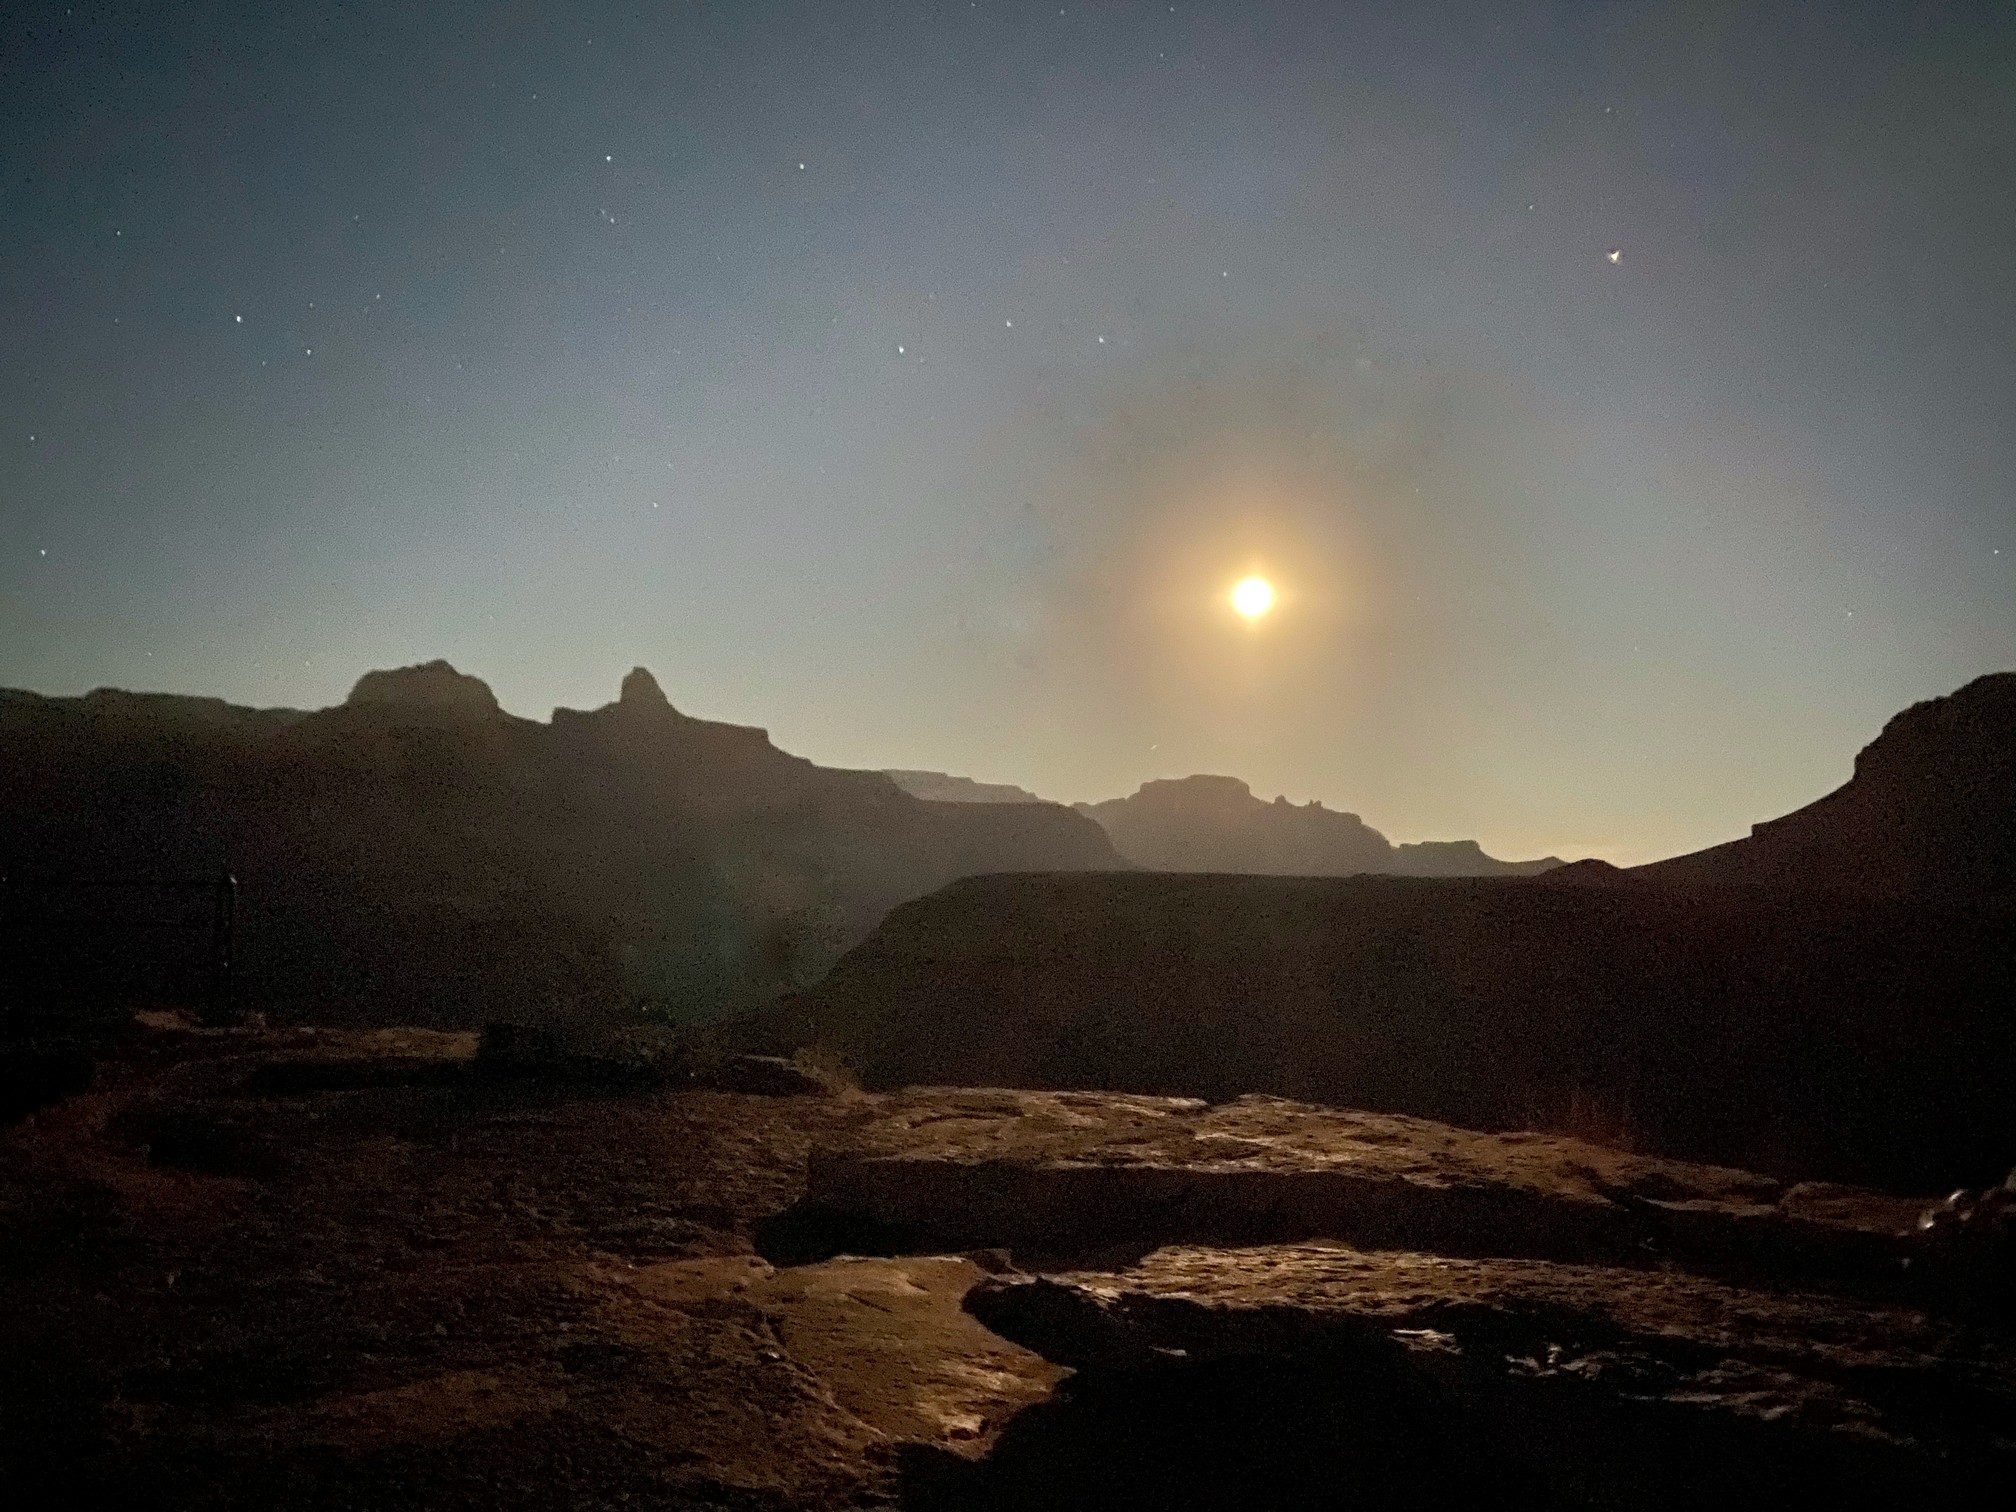 Moonrise over the Grand Canyon from Plateau Point